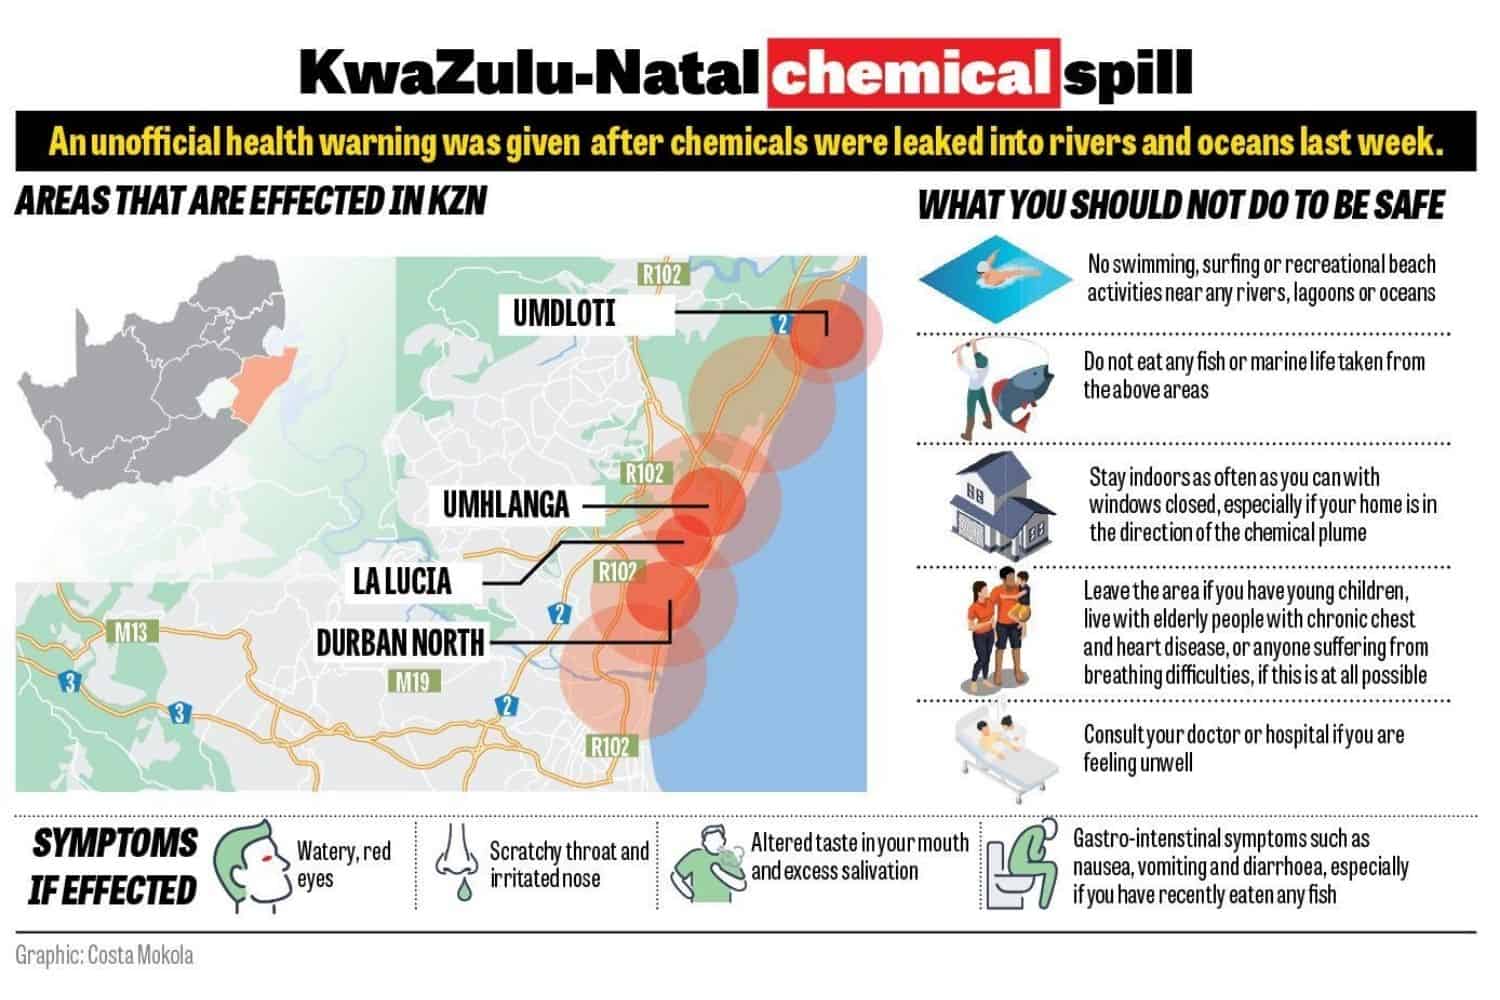 KZN chemical spill: Groundwater likely polluted, communities' health at risk